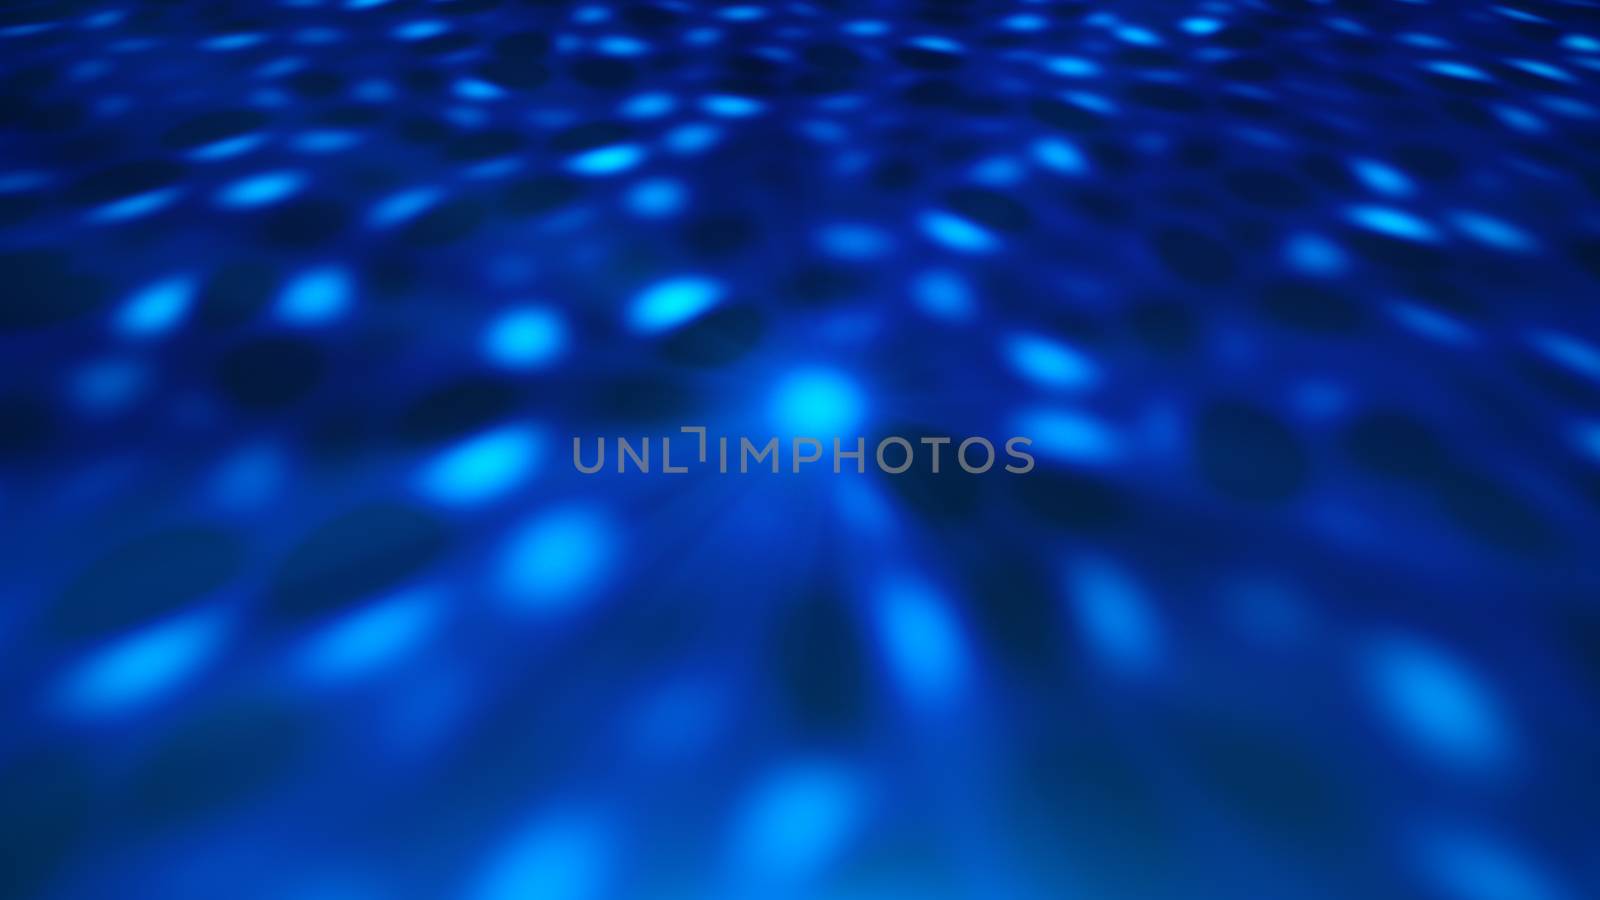 Abstract background with disco dance floor. Digital illustration by nolimit046